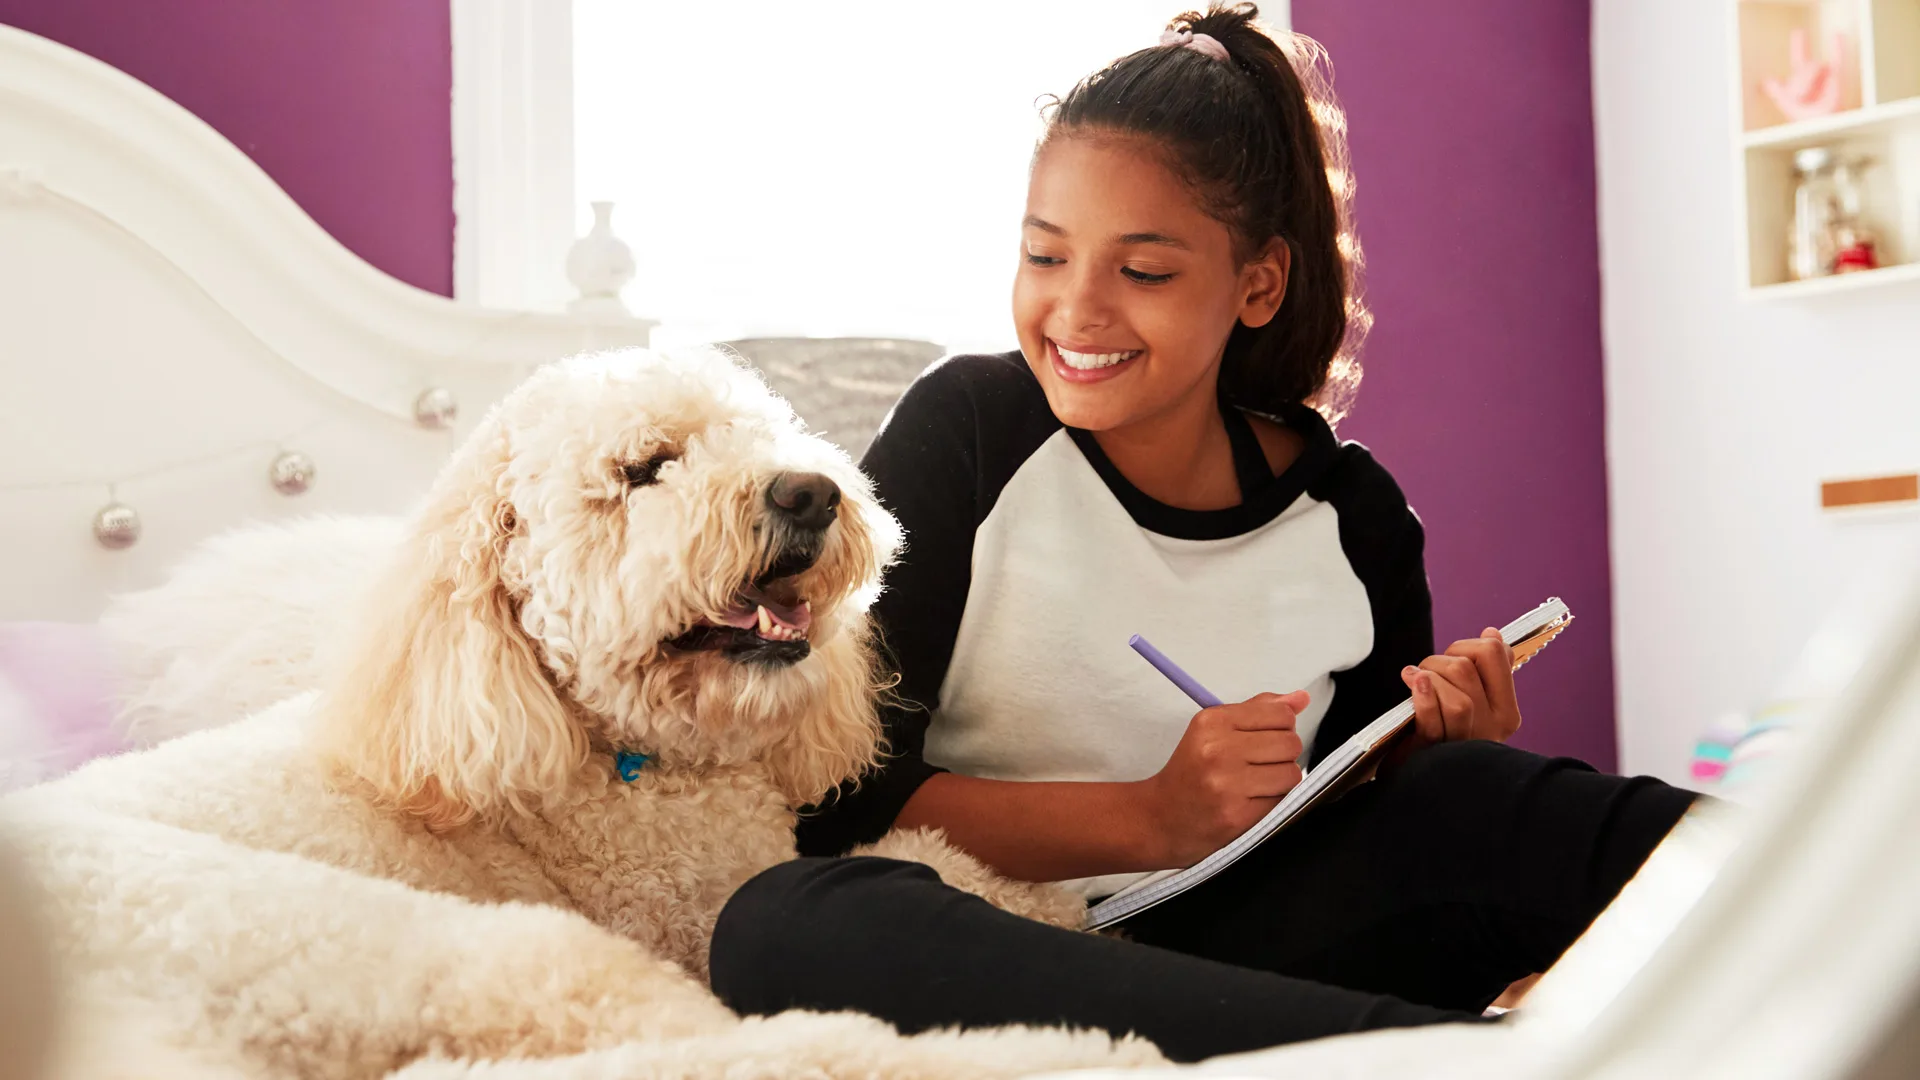 A photograph of a girl sat on her bed doing homework with her pet dog next to her and she is smiling at it